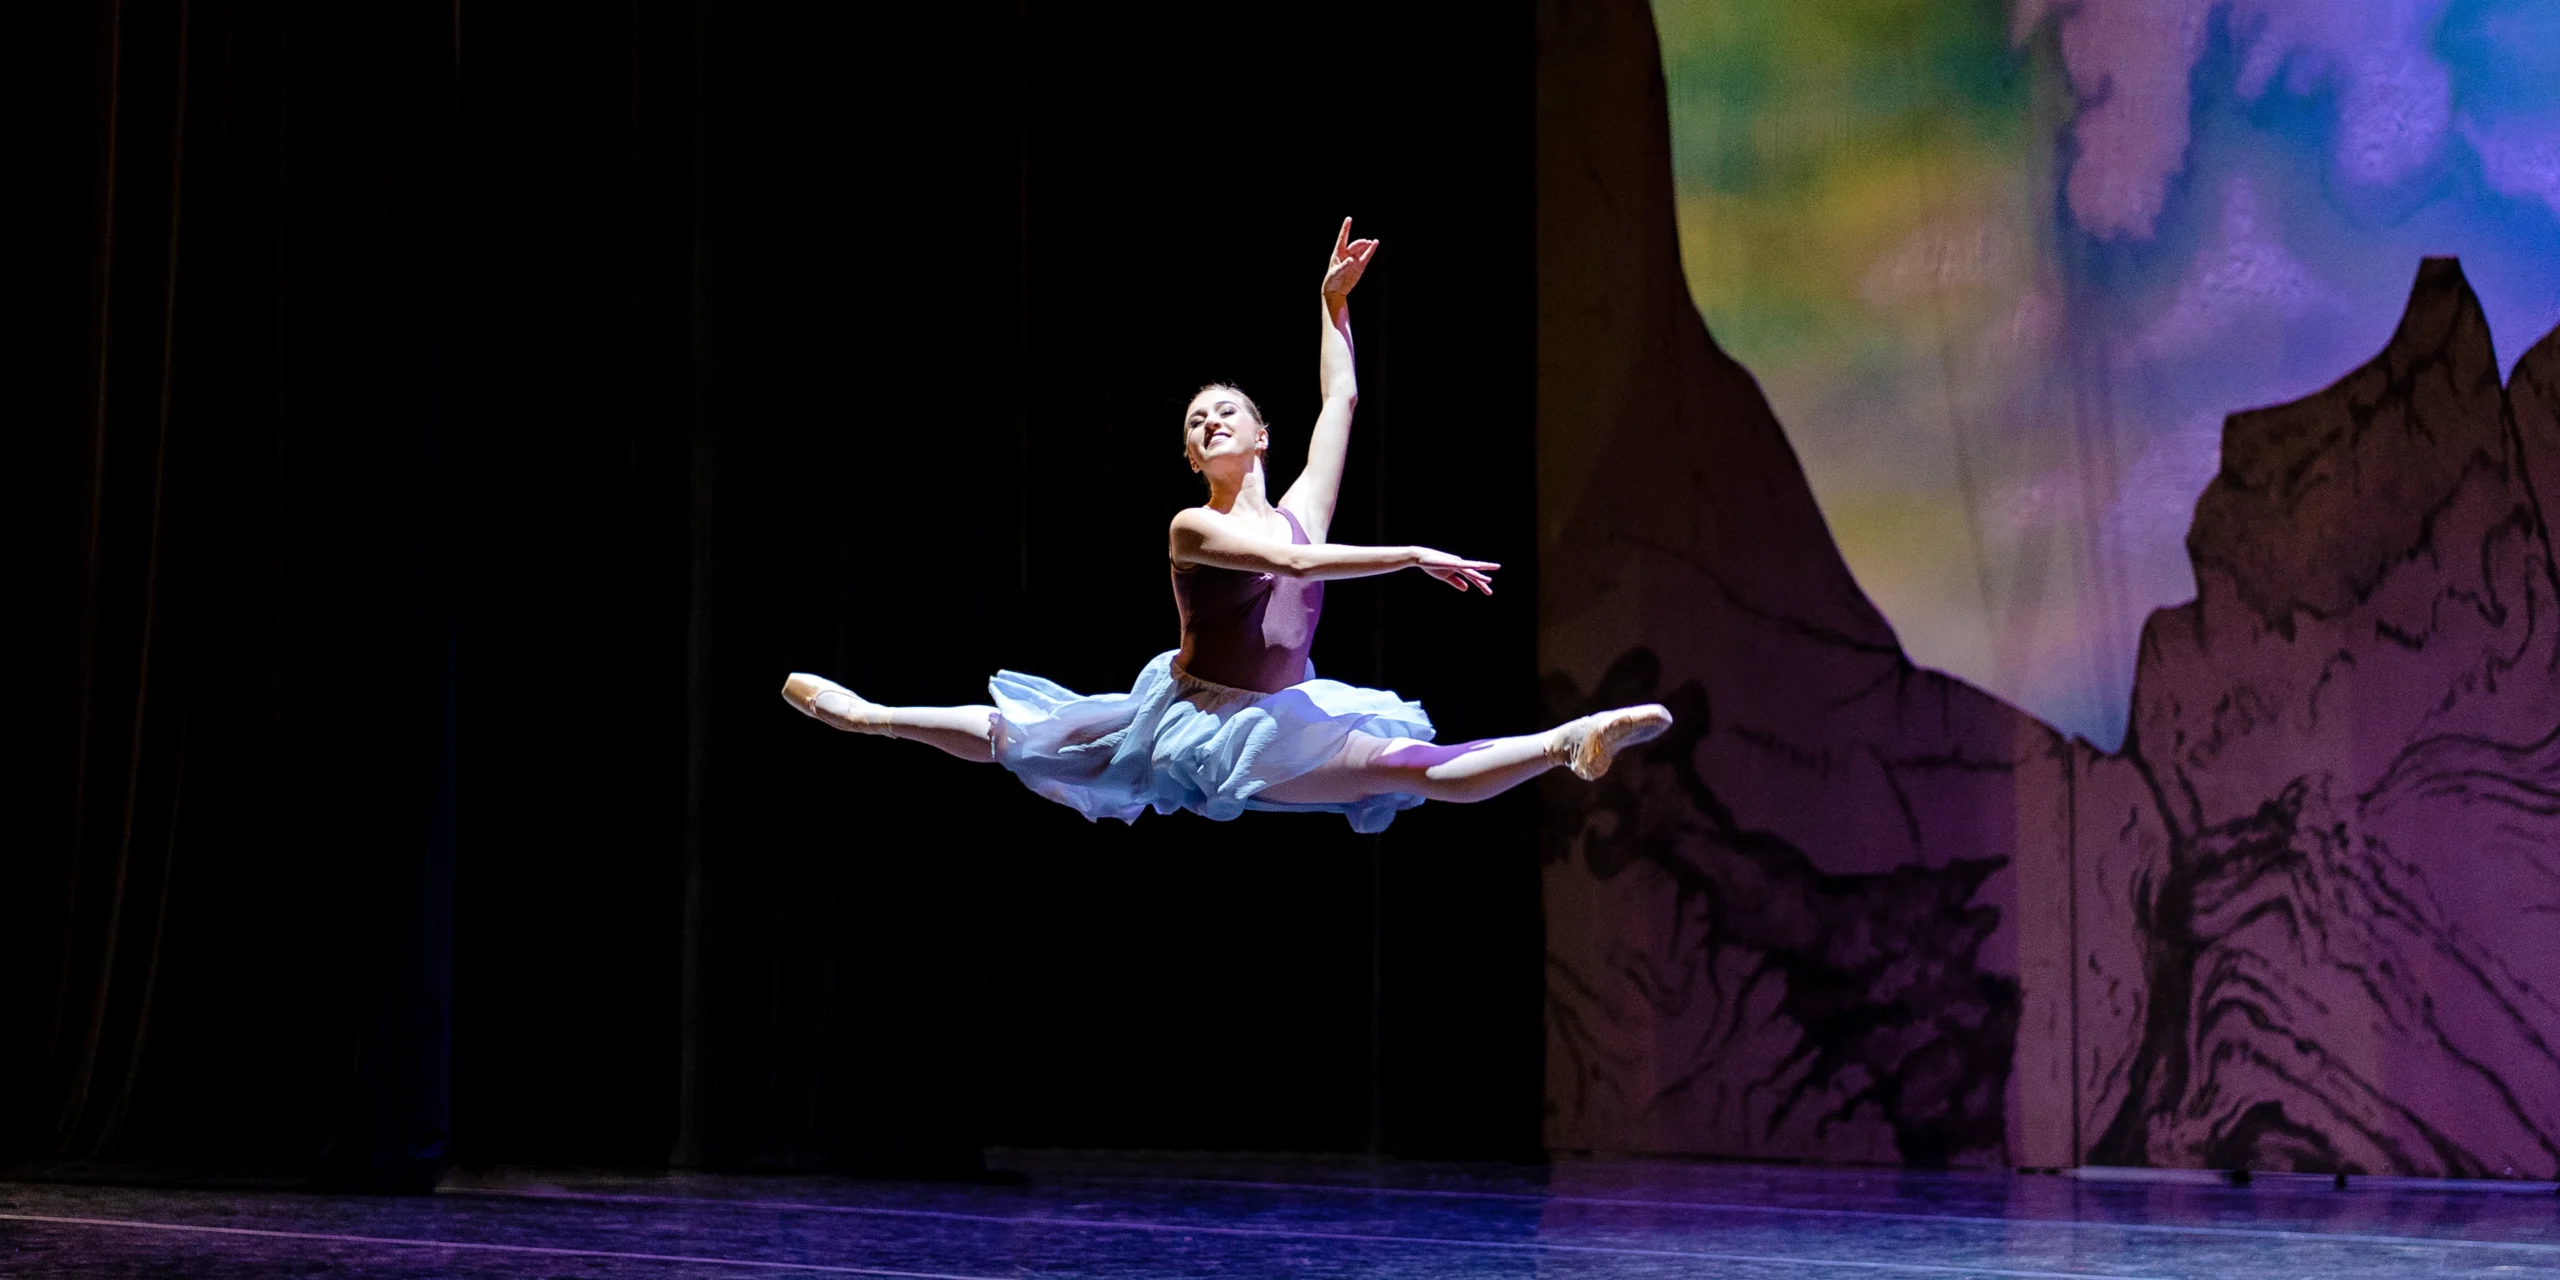 Sophie Williams, wearing a purple leotard and long, lavender skirt, does a giant saut de chat out of the wings on stage right during a performance. She holds her arms in third arabesque and looks out towards the audience with a large smile.